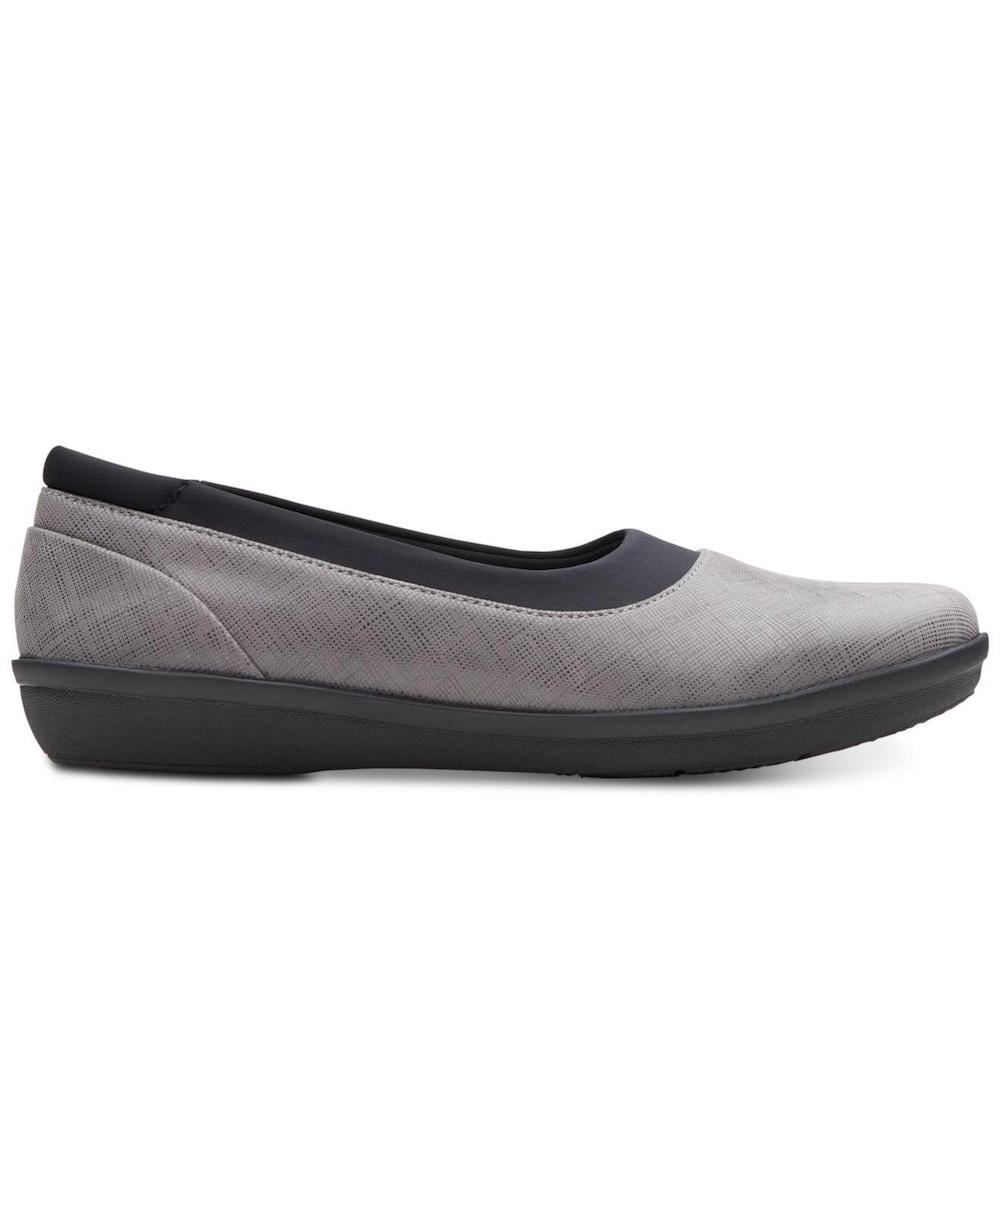 Clarks Womens Cloudsteppers Fabric 